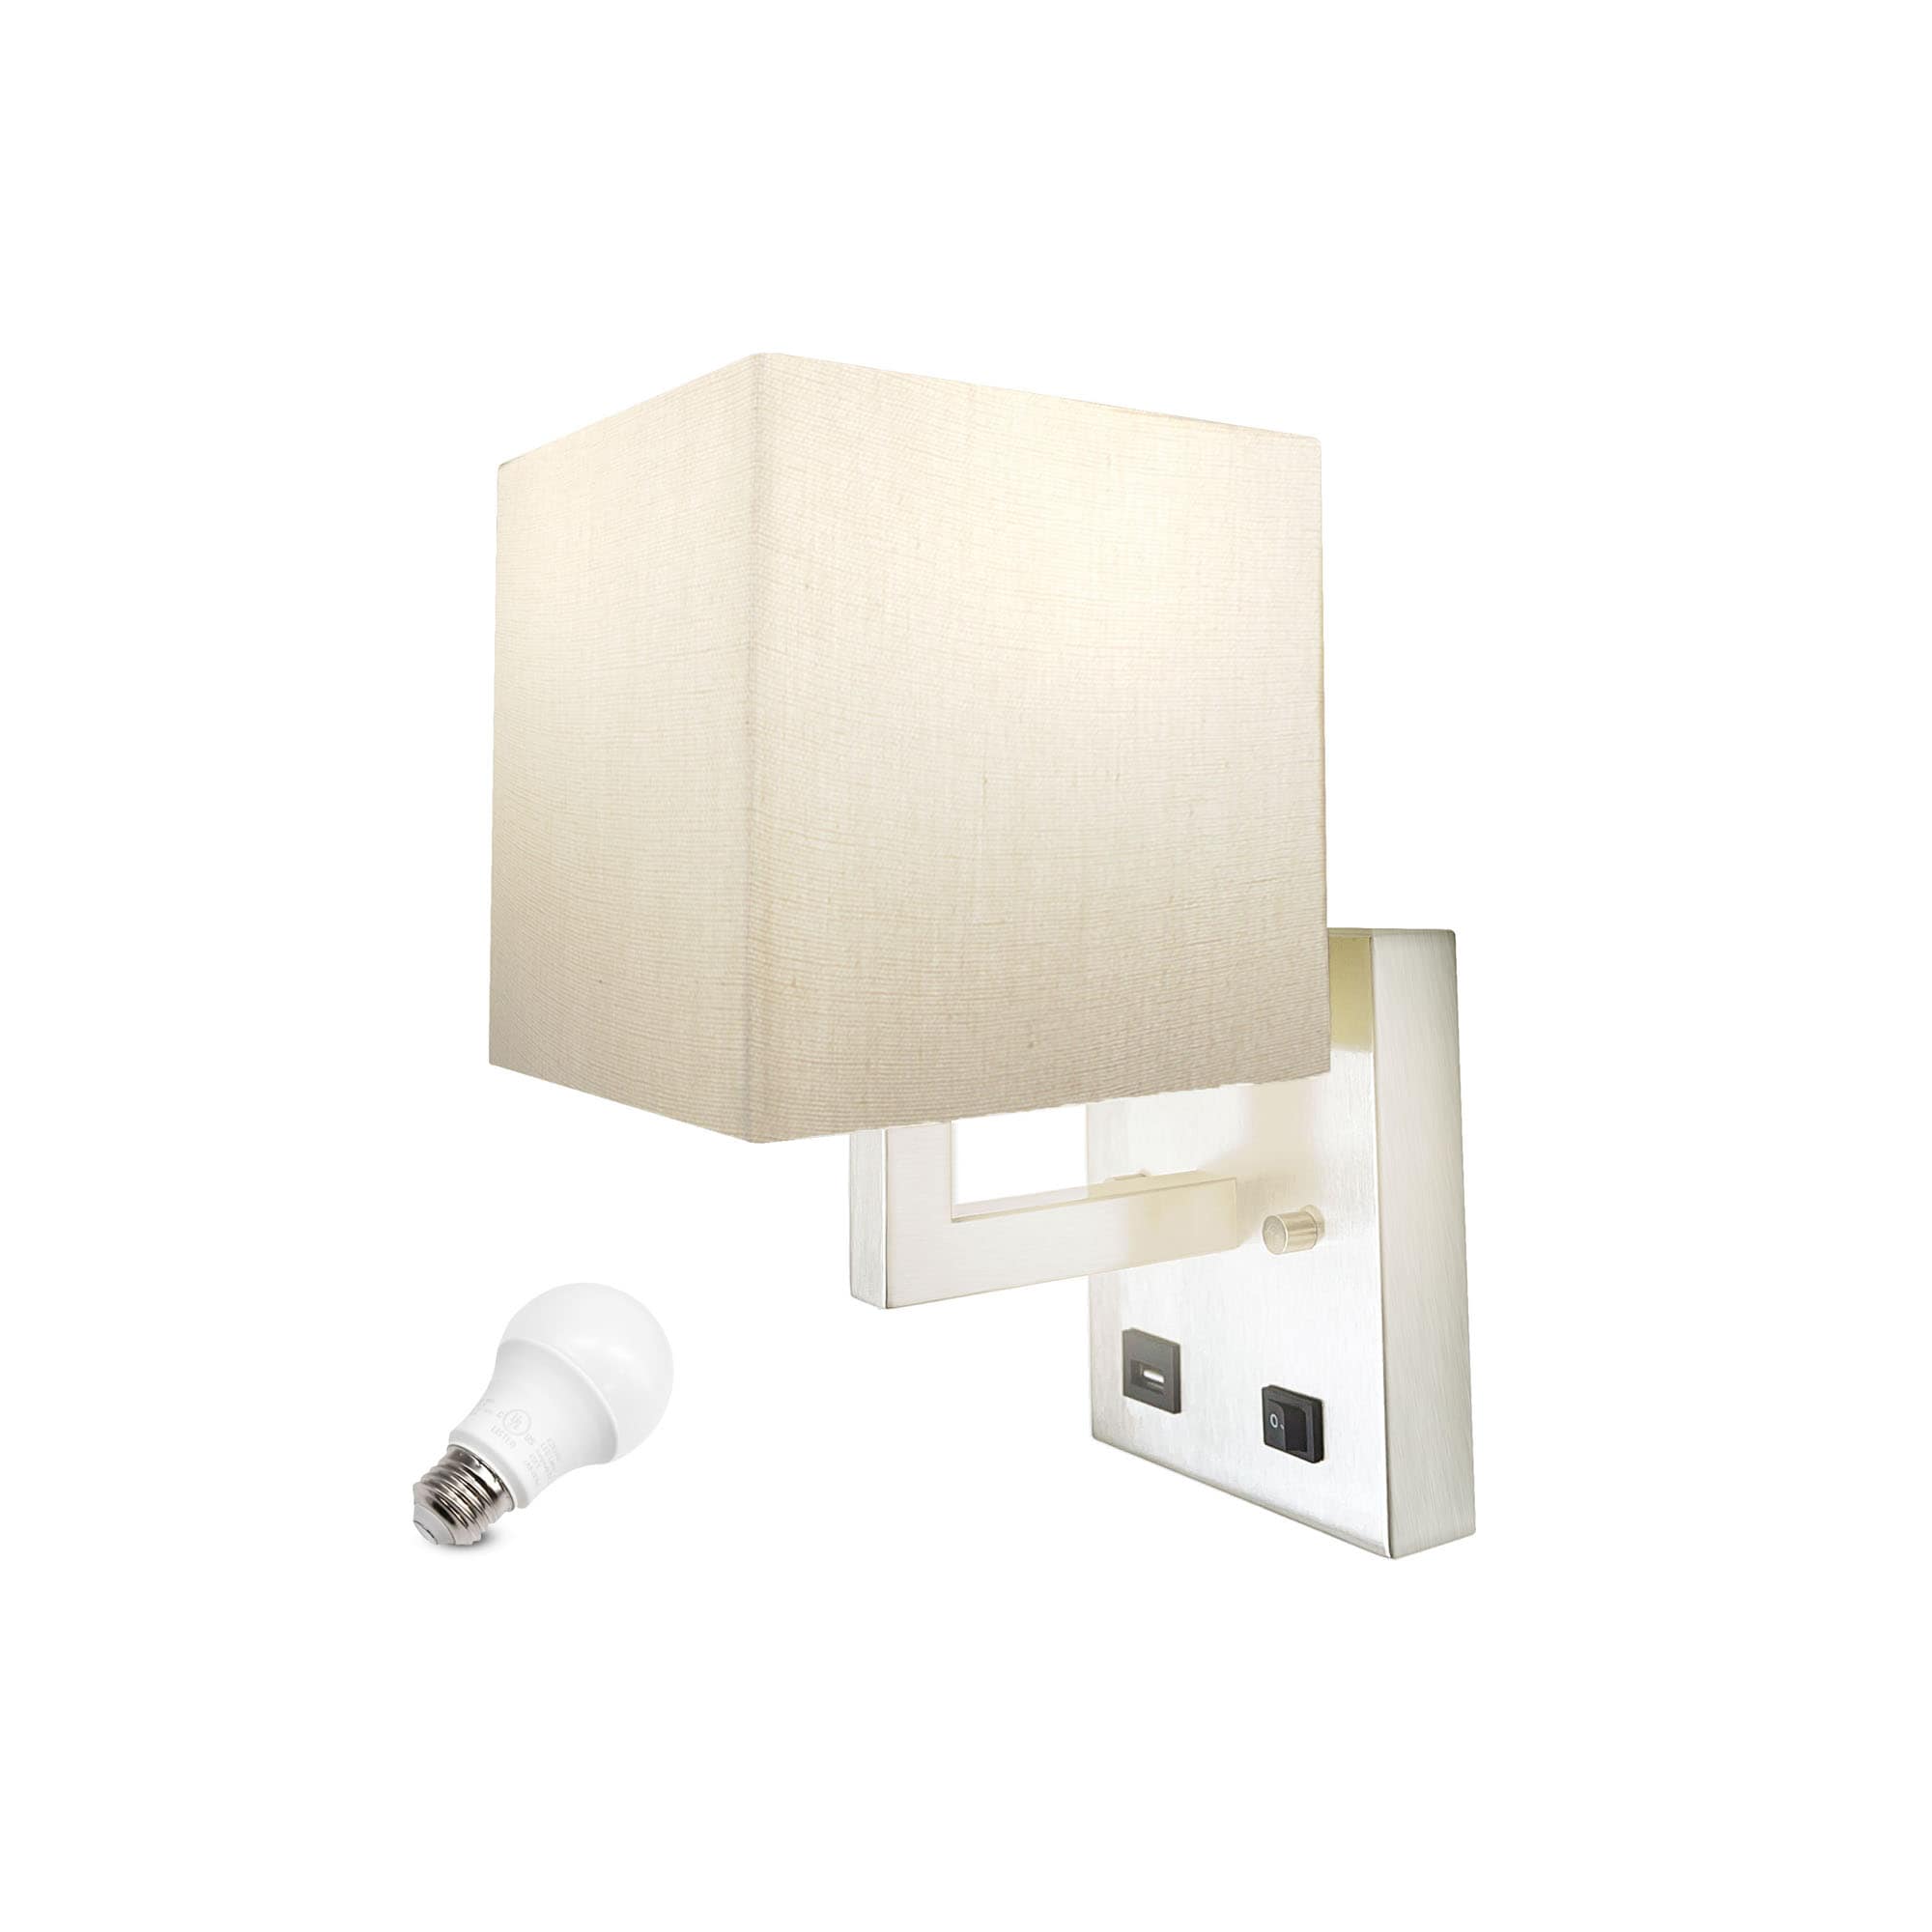 Homdec LED Bedside Wall Sconce with USB Charger 5V 2.4A and On Off Switch,  120V AC, 60W Max, 1 Replaceable E26 LED Light Bulb, Screws Installation,  Dimension W 8 1/2'', H 10